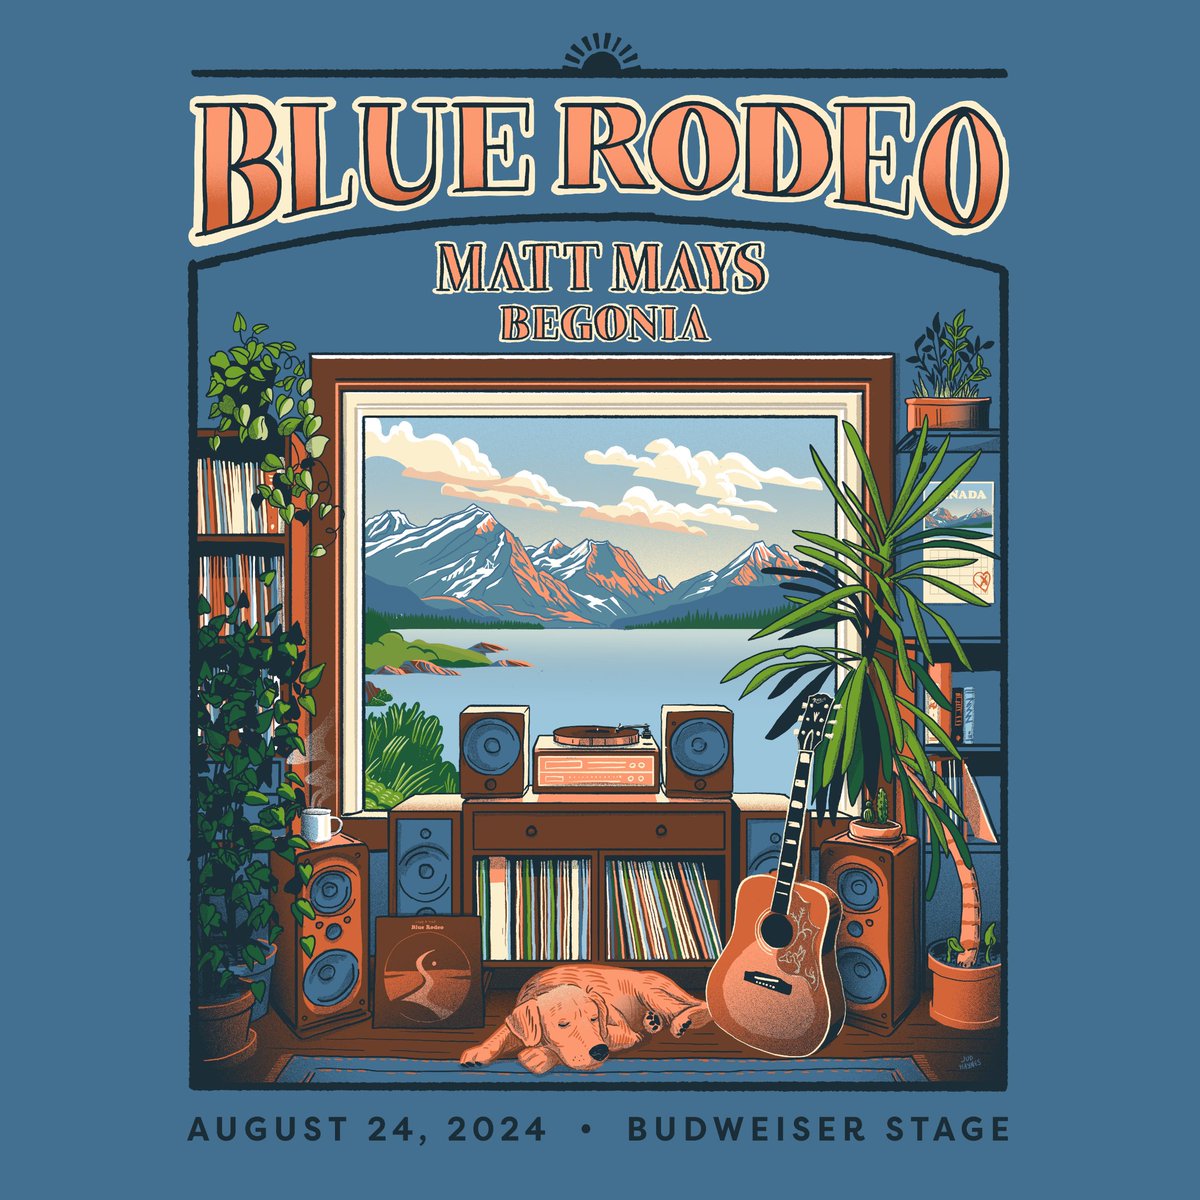 It's that time of year again! Blue Rodeo has announced their show at @BudweiserStage on August 24, 2024! The BlueRodeo.com presale starts Tuesday, March 12 at 10 am ET at tour.bluerodeo.com